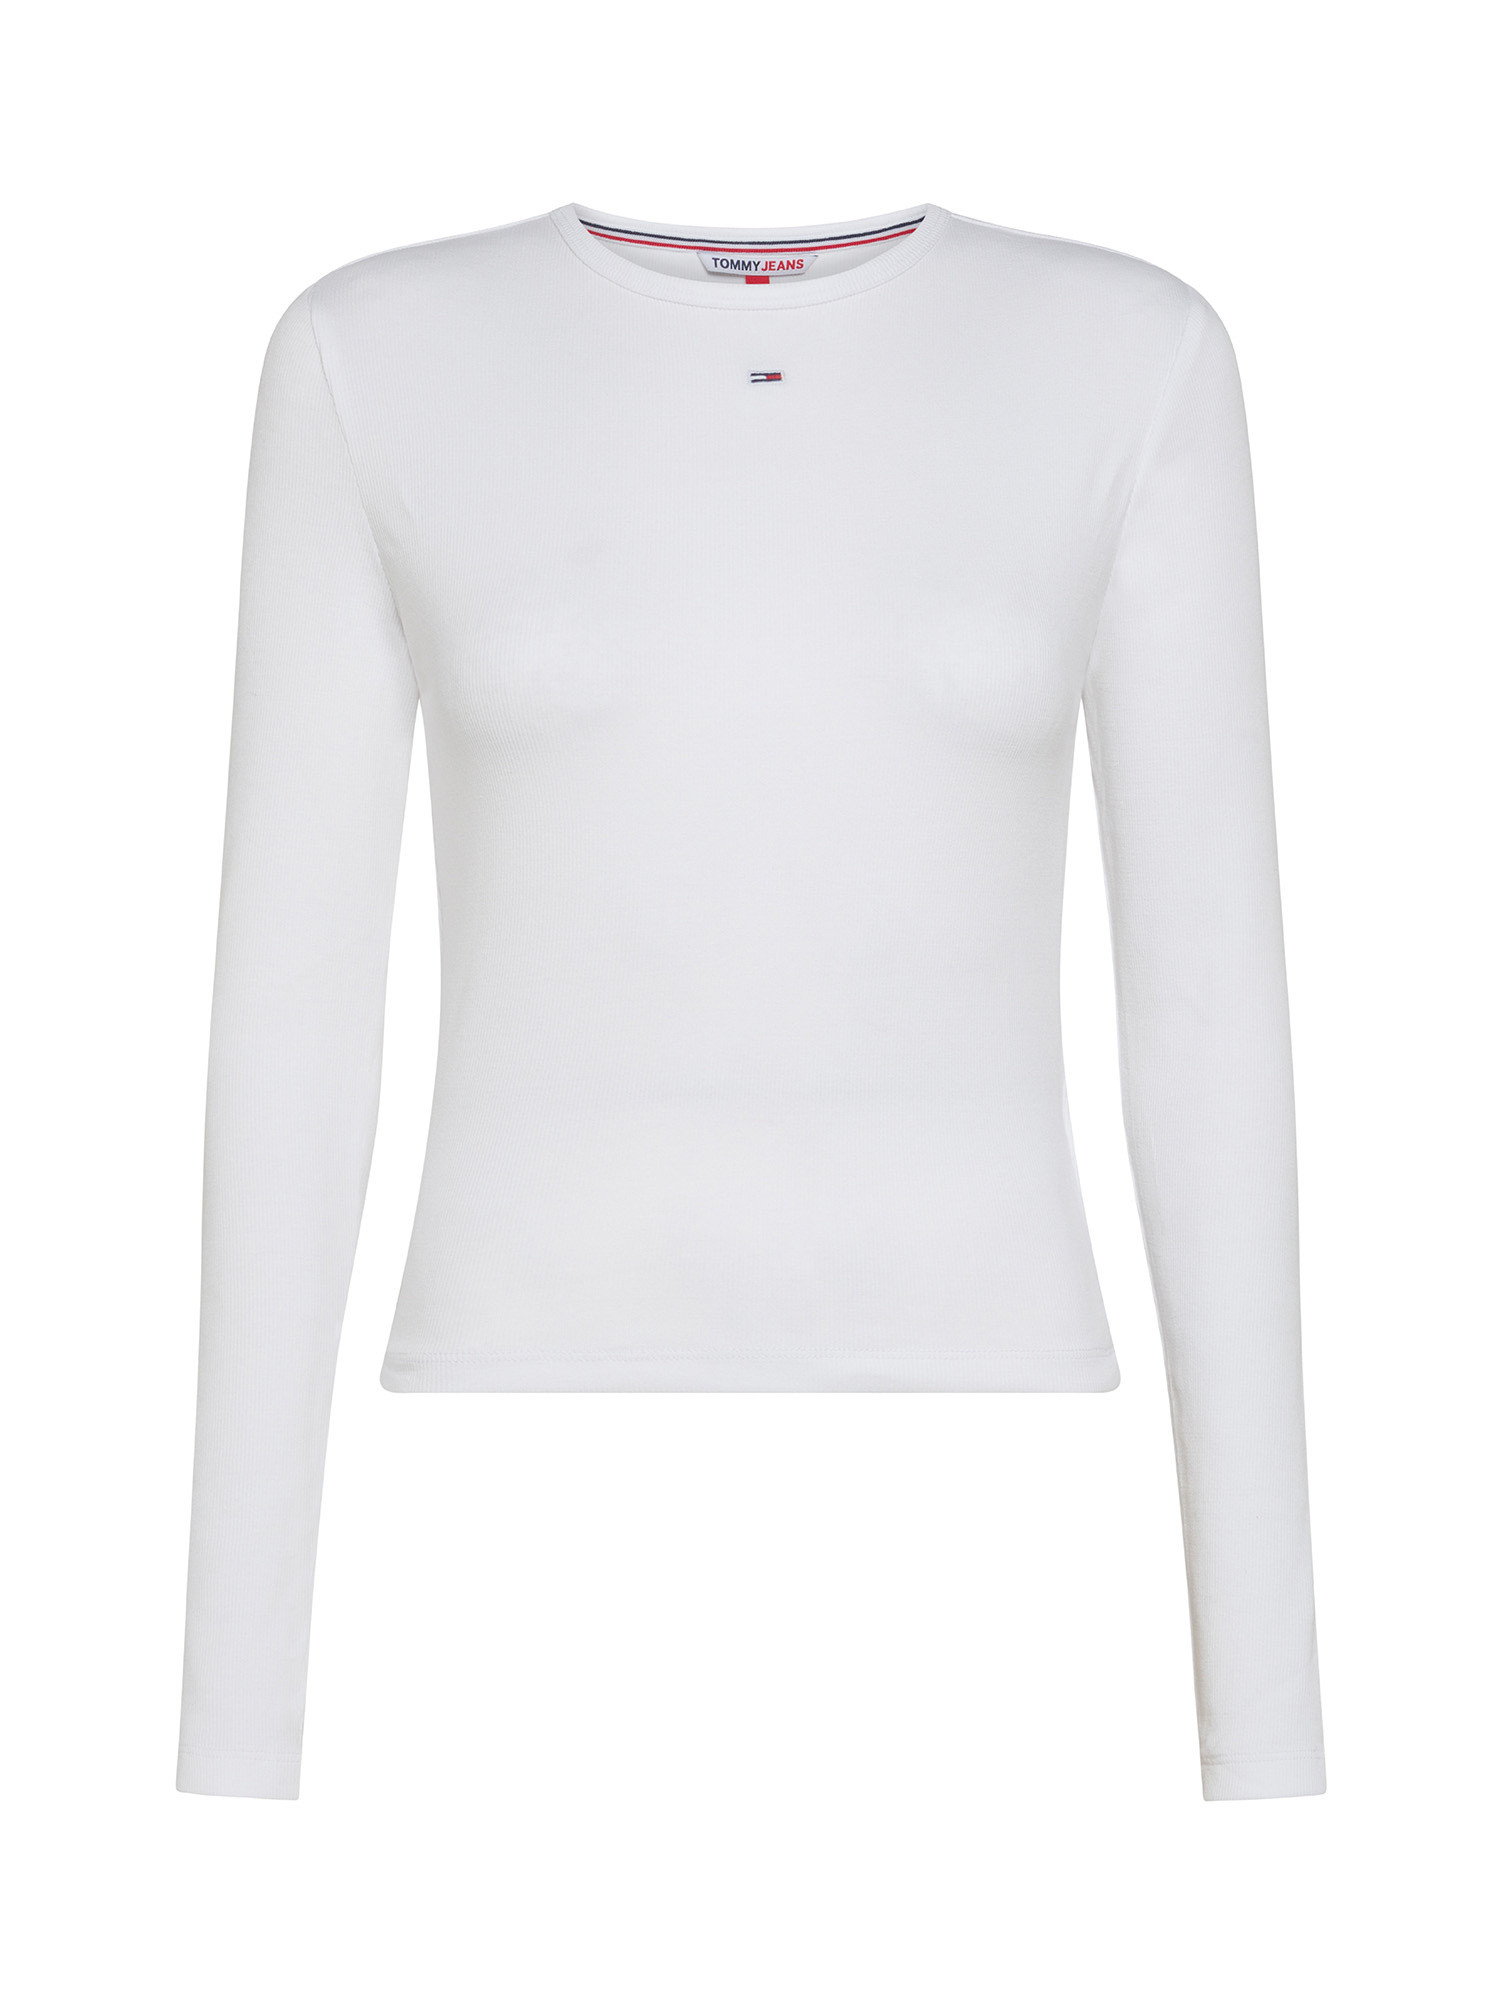 Tommy Jeans - Maglia girocollo con logo in cotone, Bianco, large image number 0